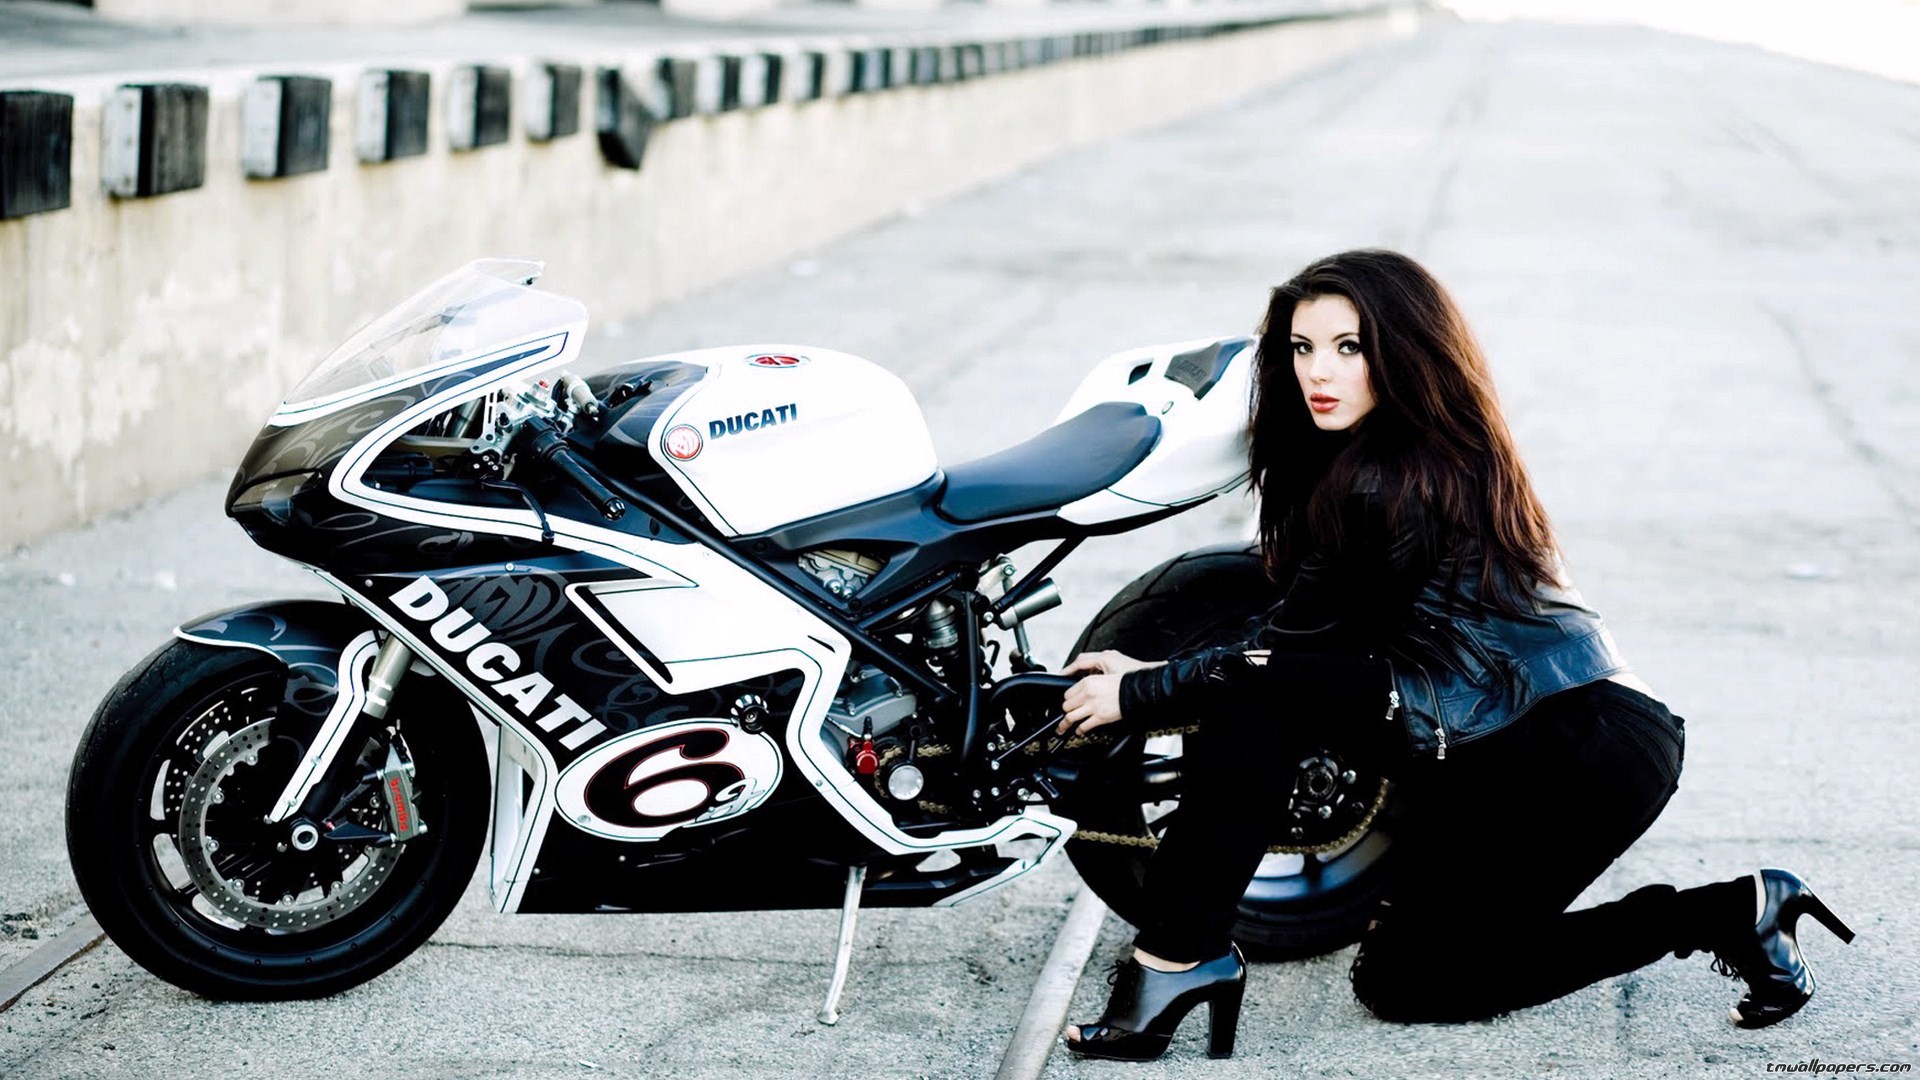 1920x1080 motorcycle girls wallpaper free funny photos pictures images 2013